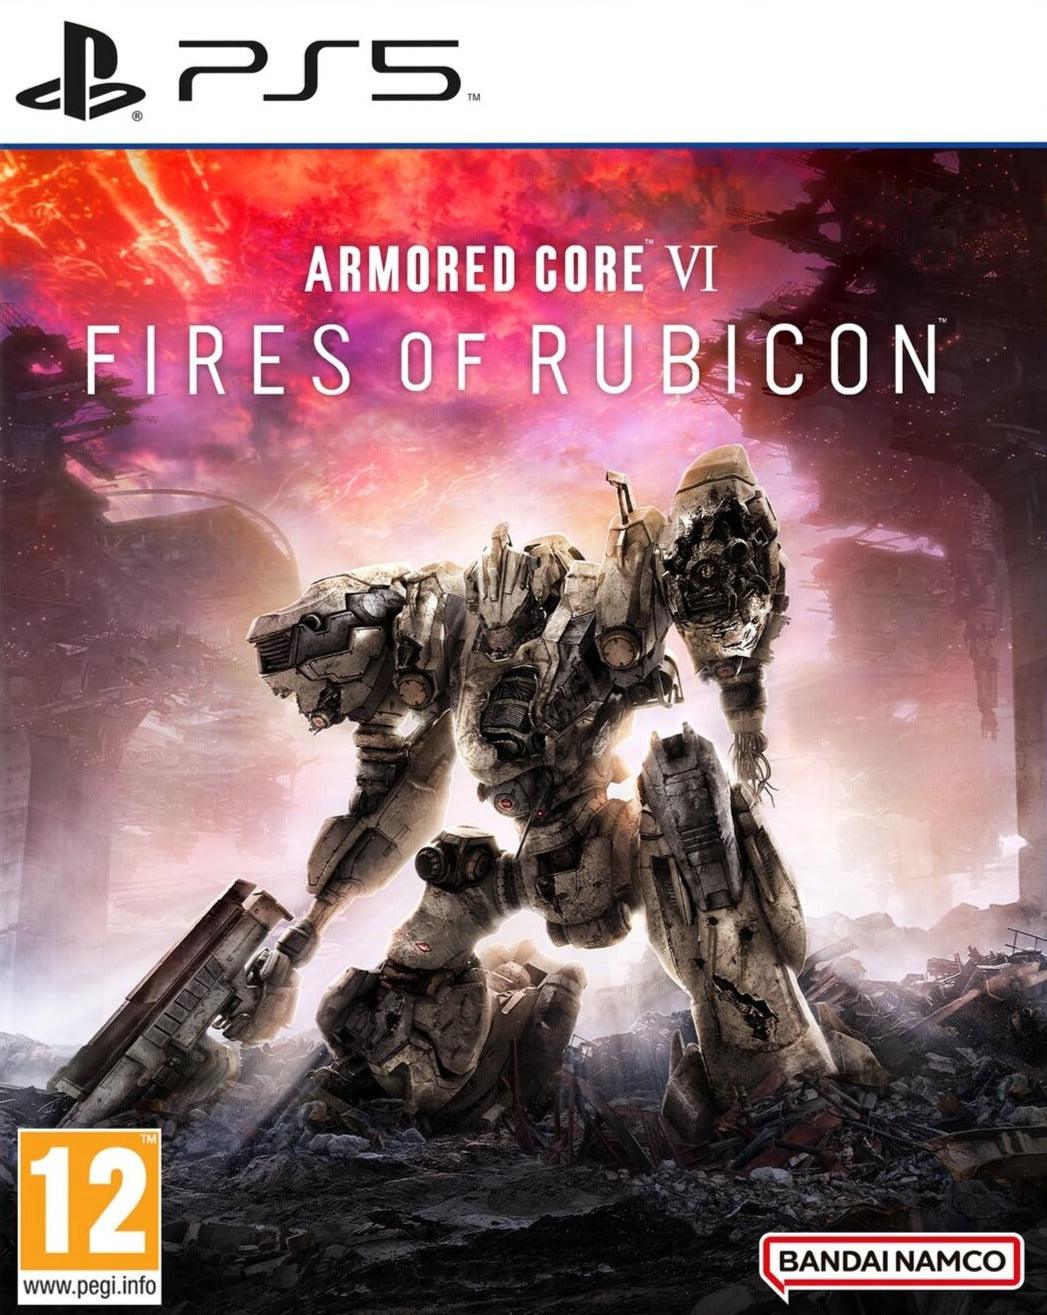 Armored Core VI: Fires of Rubicon / PS5 / Playstation 5 - GD Games 